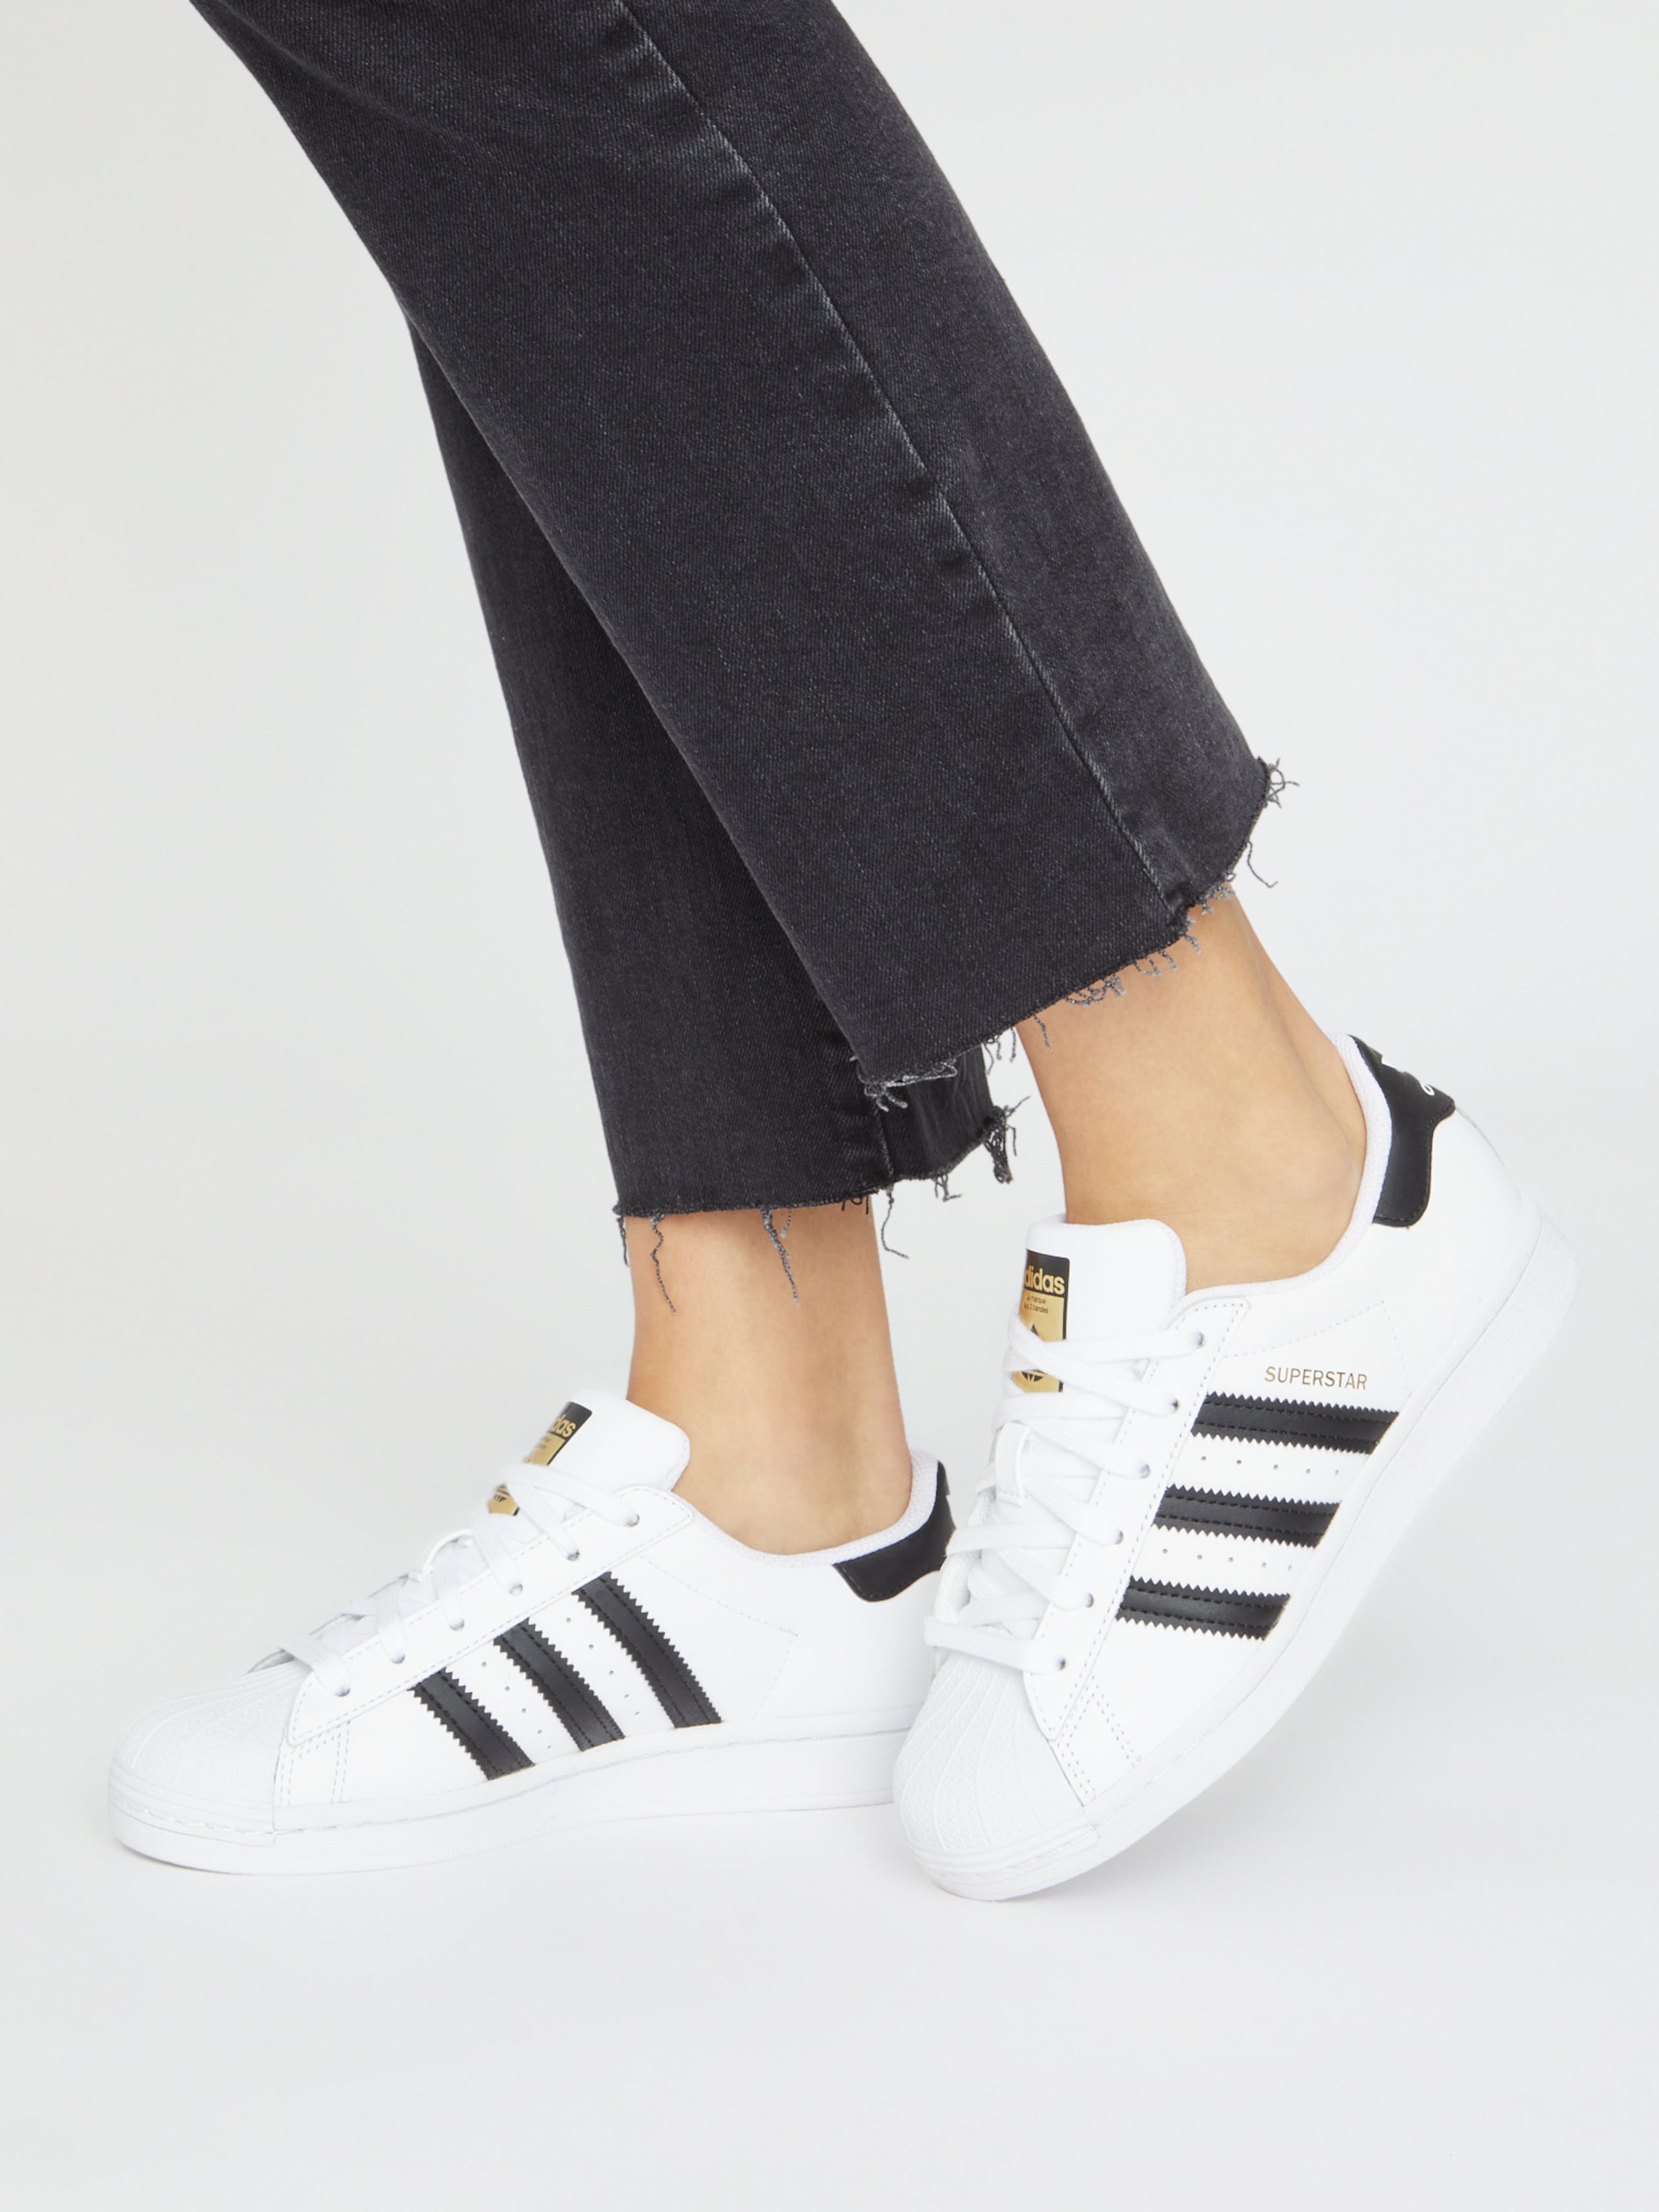 Spectaculair Negen Pebish ADIDAS ORIGINALS Sneakers 'SUPERSTAR' in White | ABOUT YOU